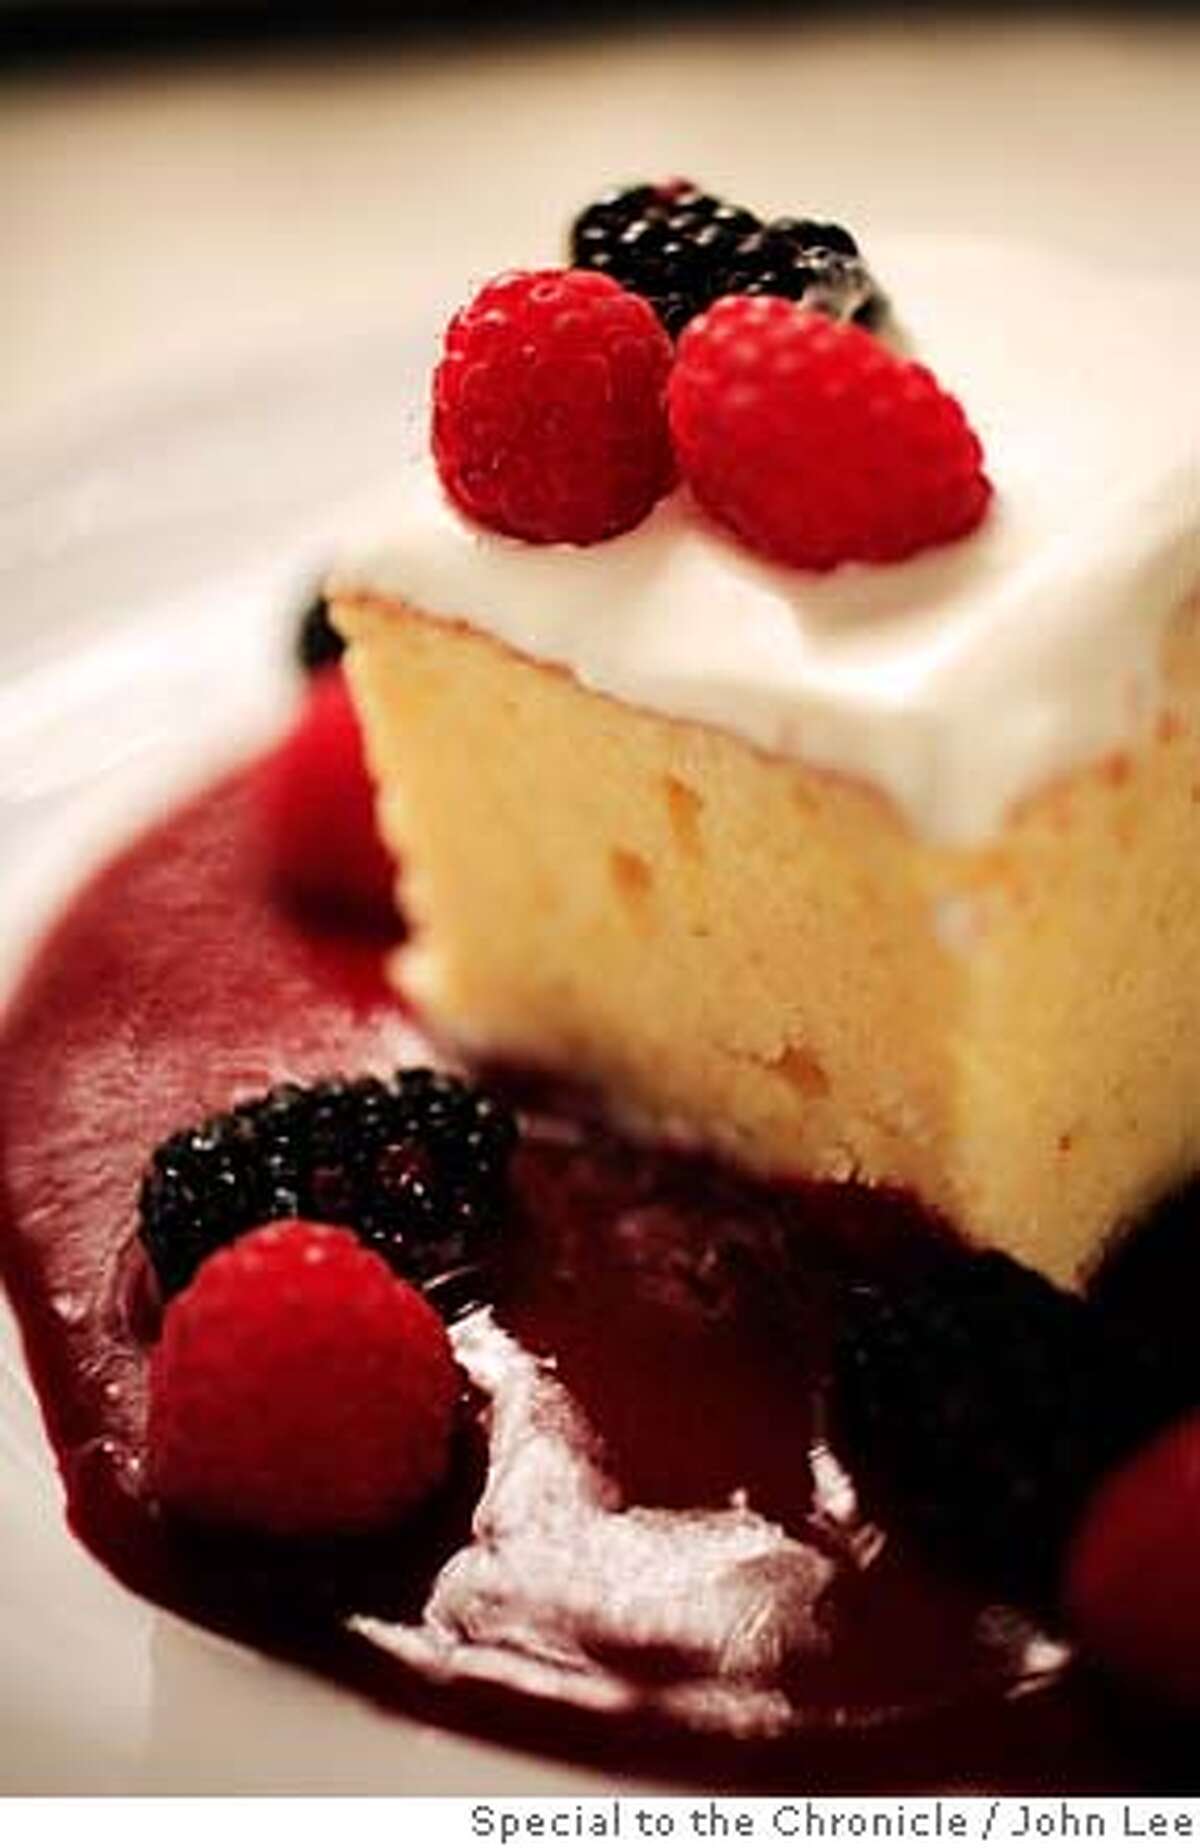 SOUTH01_02_JOHNLEE.JPG Tres Leches cake. By JOHN LEE/SPECIAL TO THE CHRONICLE